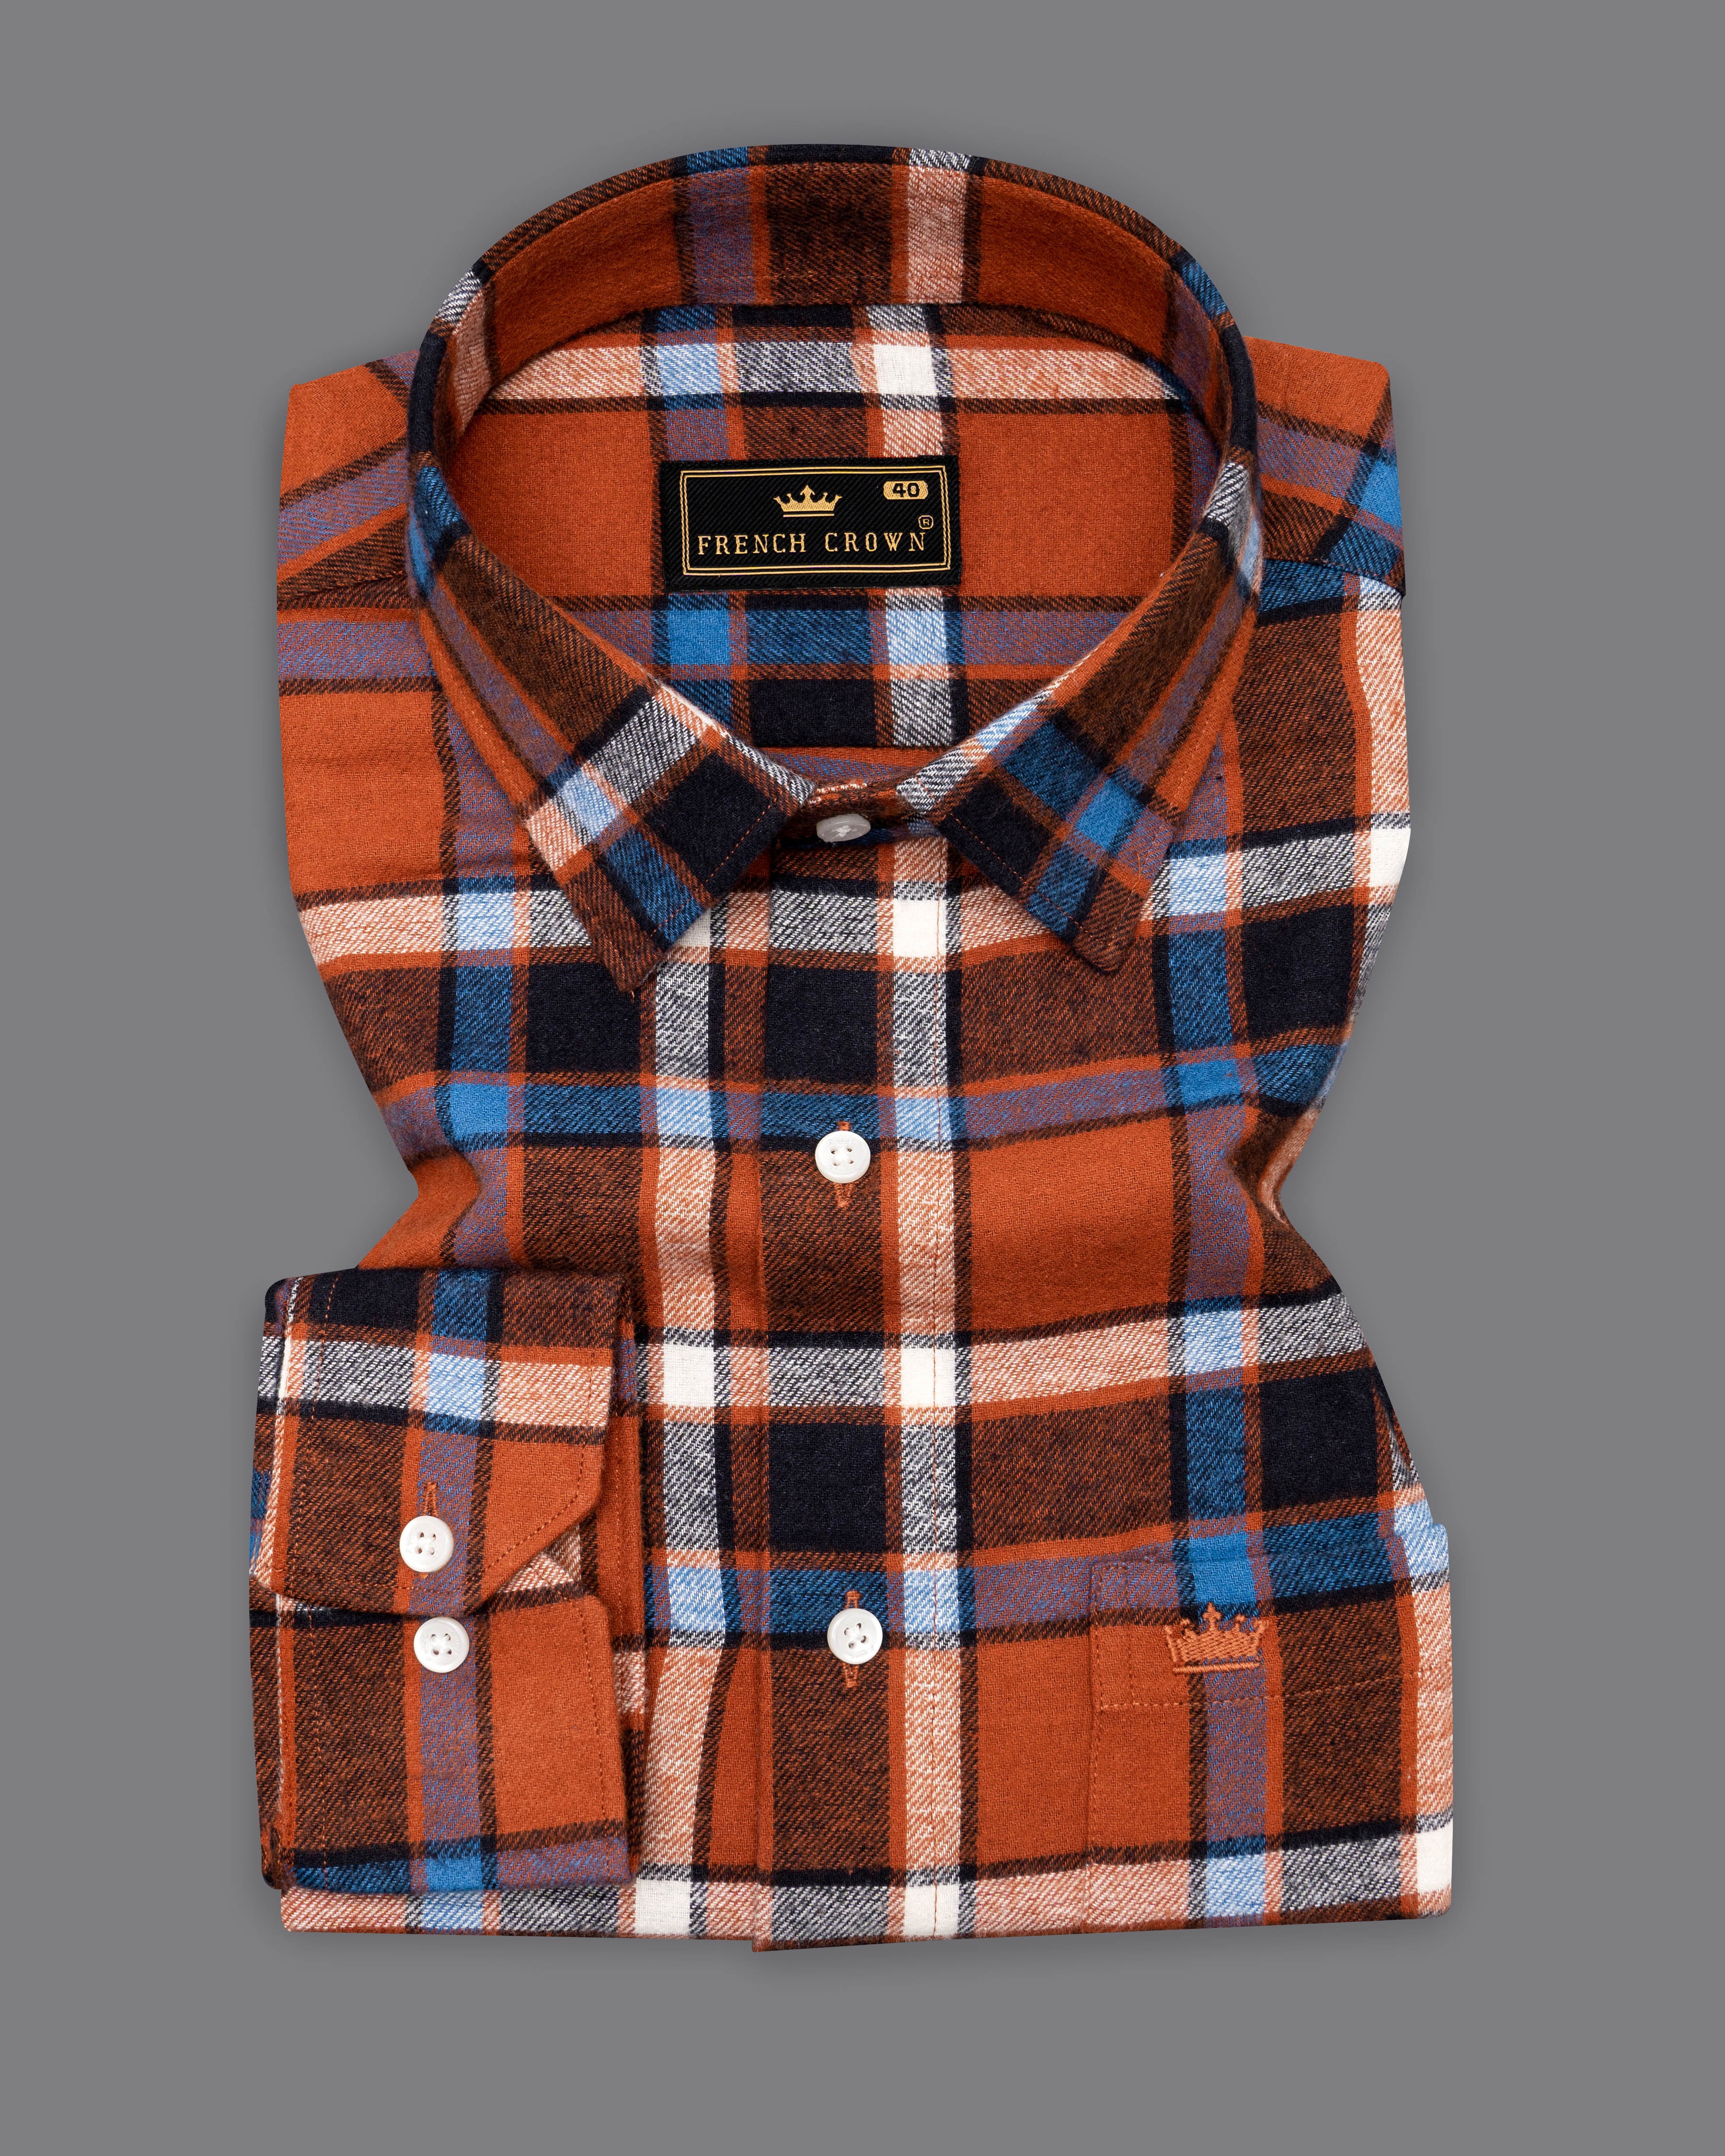 Sienna Brown with Black and Havelock Blue Plaid Flannel Overshirt 9537-OS-38, 9537-OS-H-38, 9537-OS-39, 9537-OS-H-39, 9537-OS-40, 9537-OS-H-40, 9537-OS-42, 9537-OS-H-42, 9537-OS-44, 9537-OS-H-44, 9537-OS-46, 9537-OS-H-46, 9537-OS-48, 9537-OS-H-48, 9537-OS-50, 9537-OS-H-50, 9537-OS-52, 9537-OS-H-52